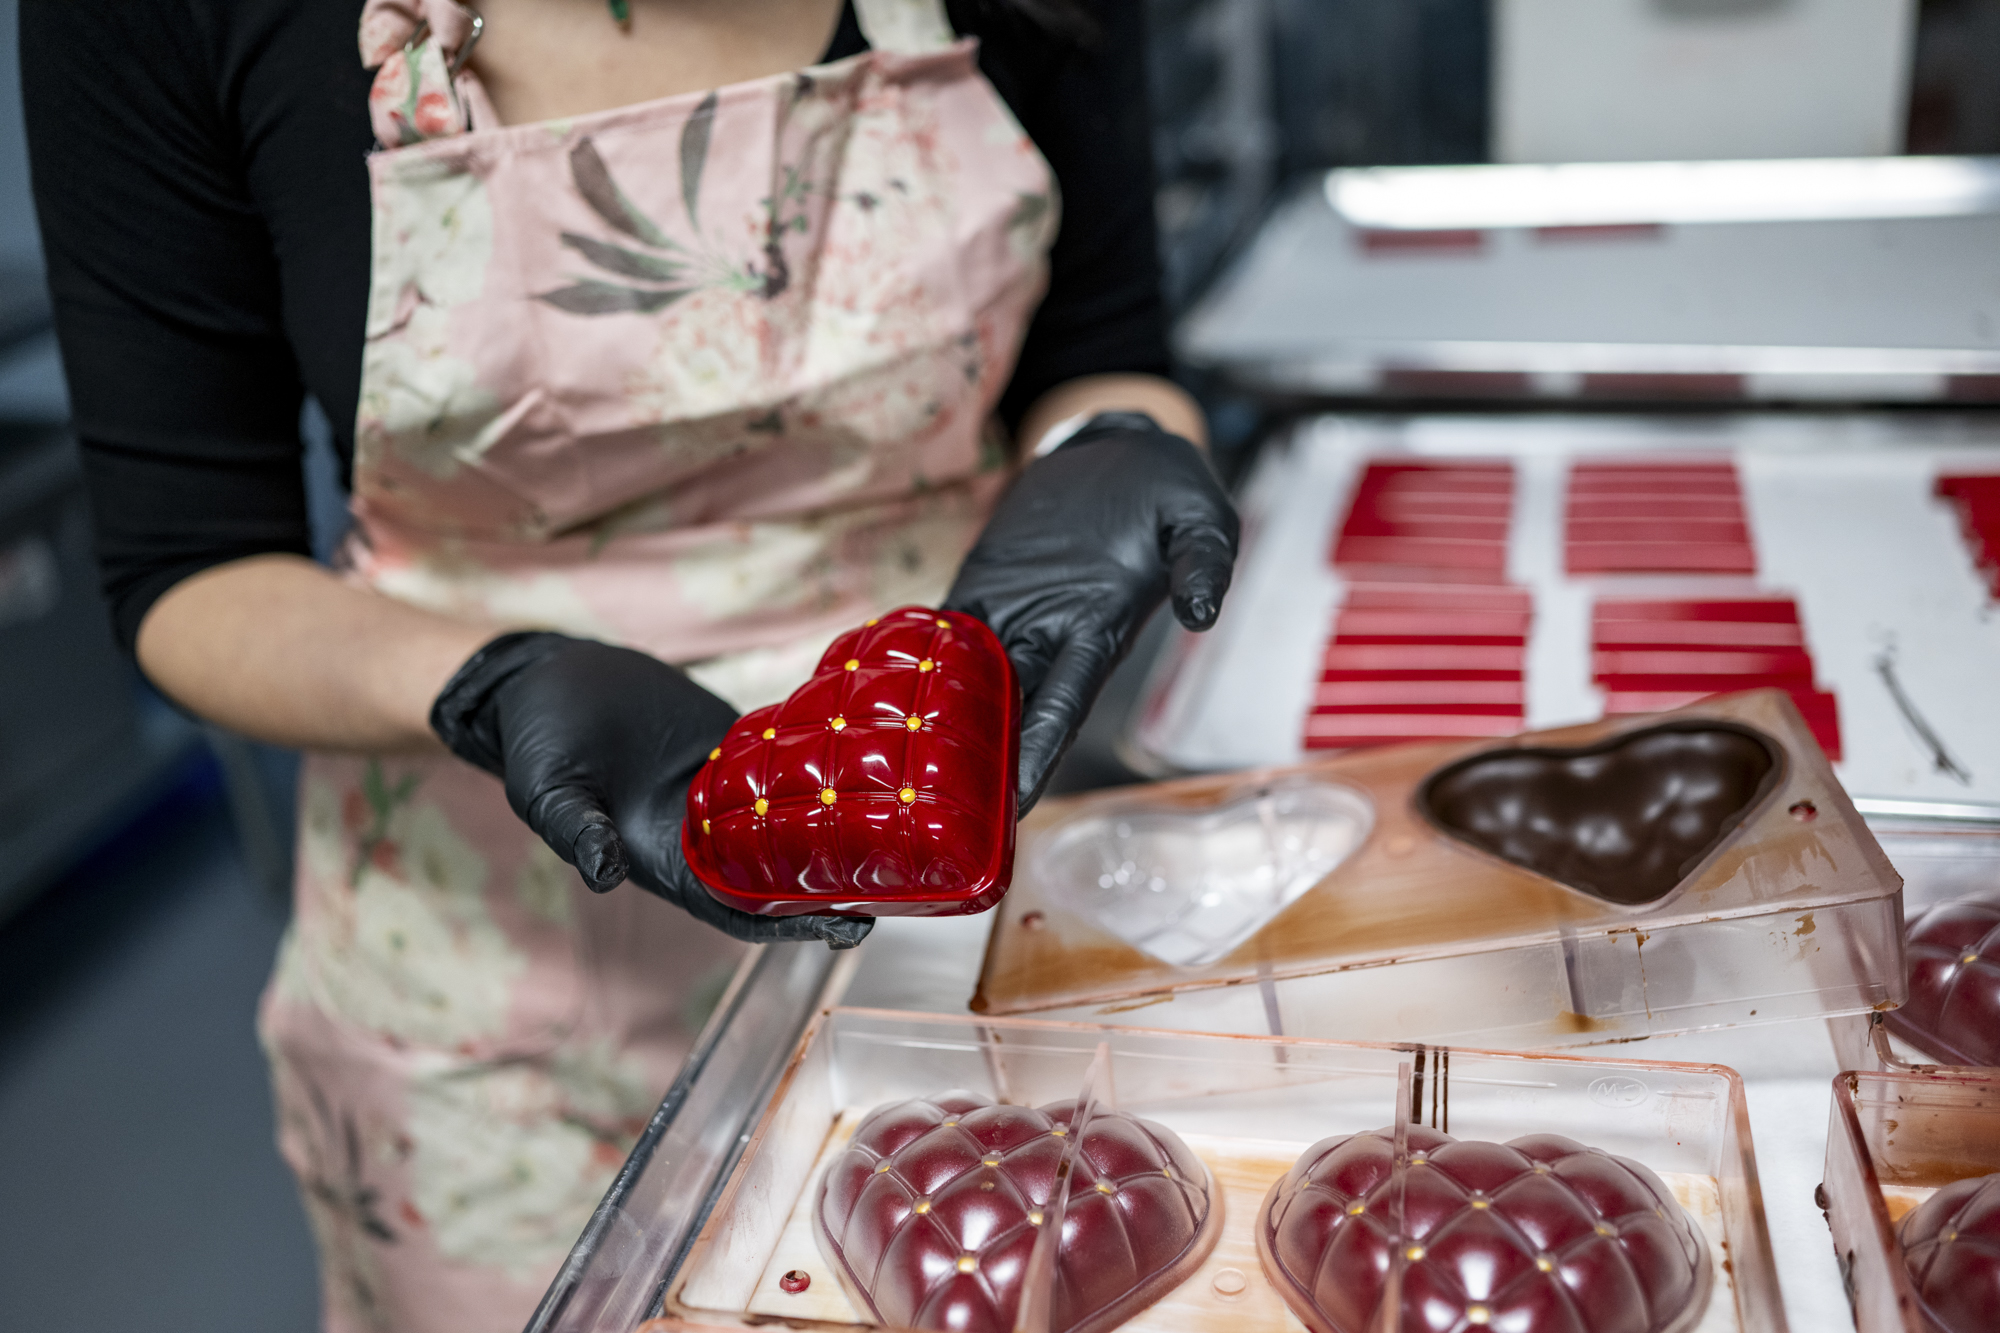 Pair of gloved hands hold a red heart shaped mold for making chocolates.